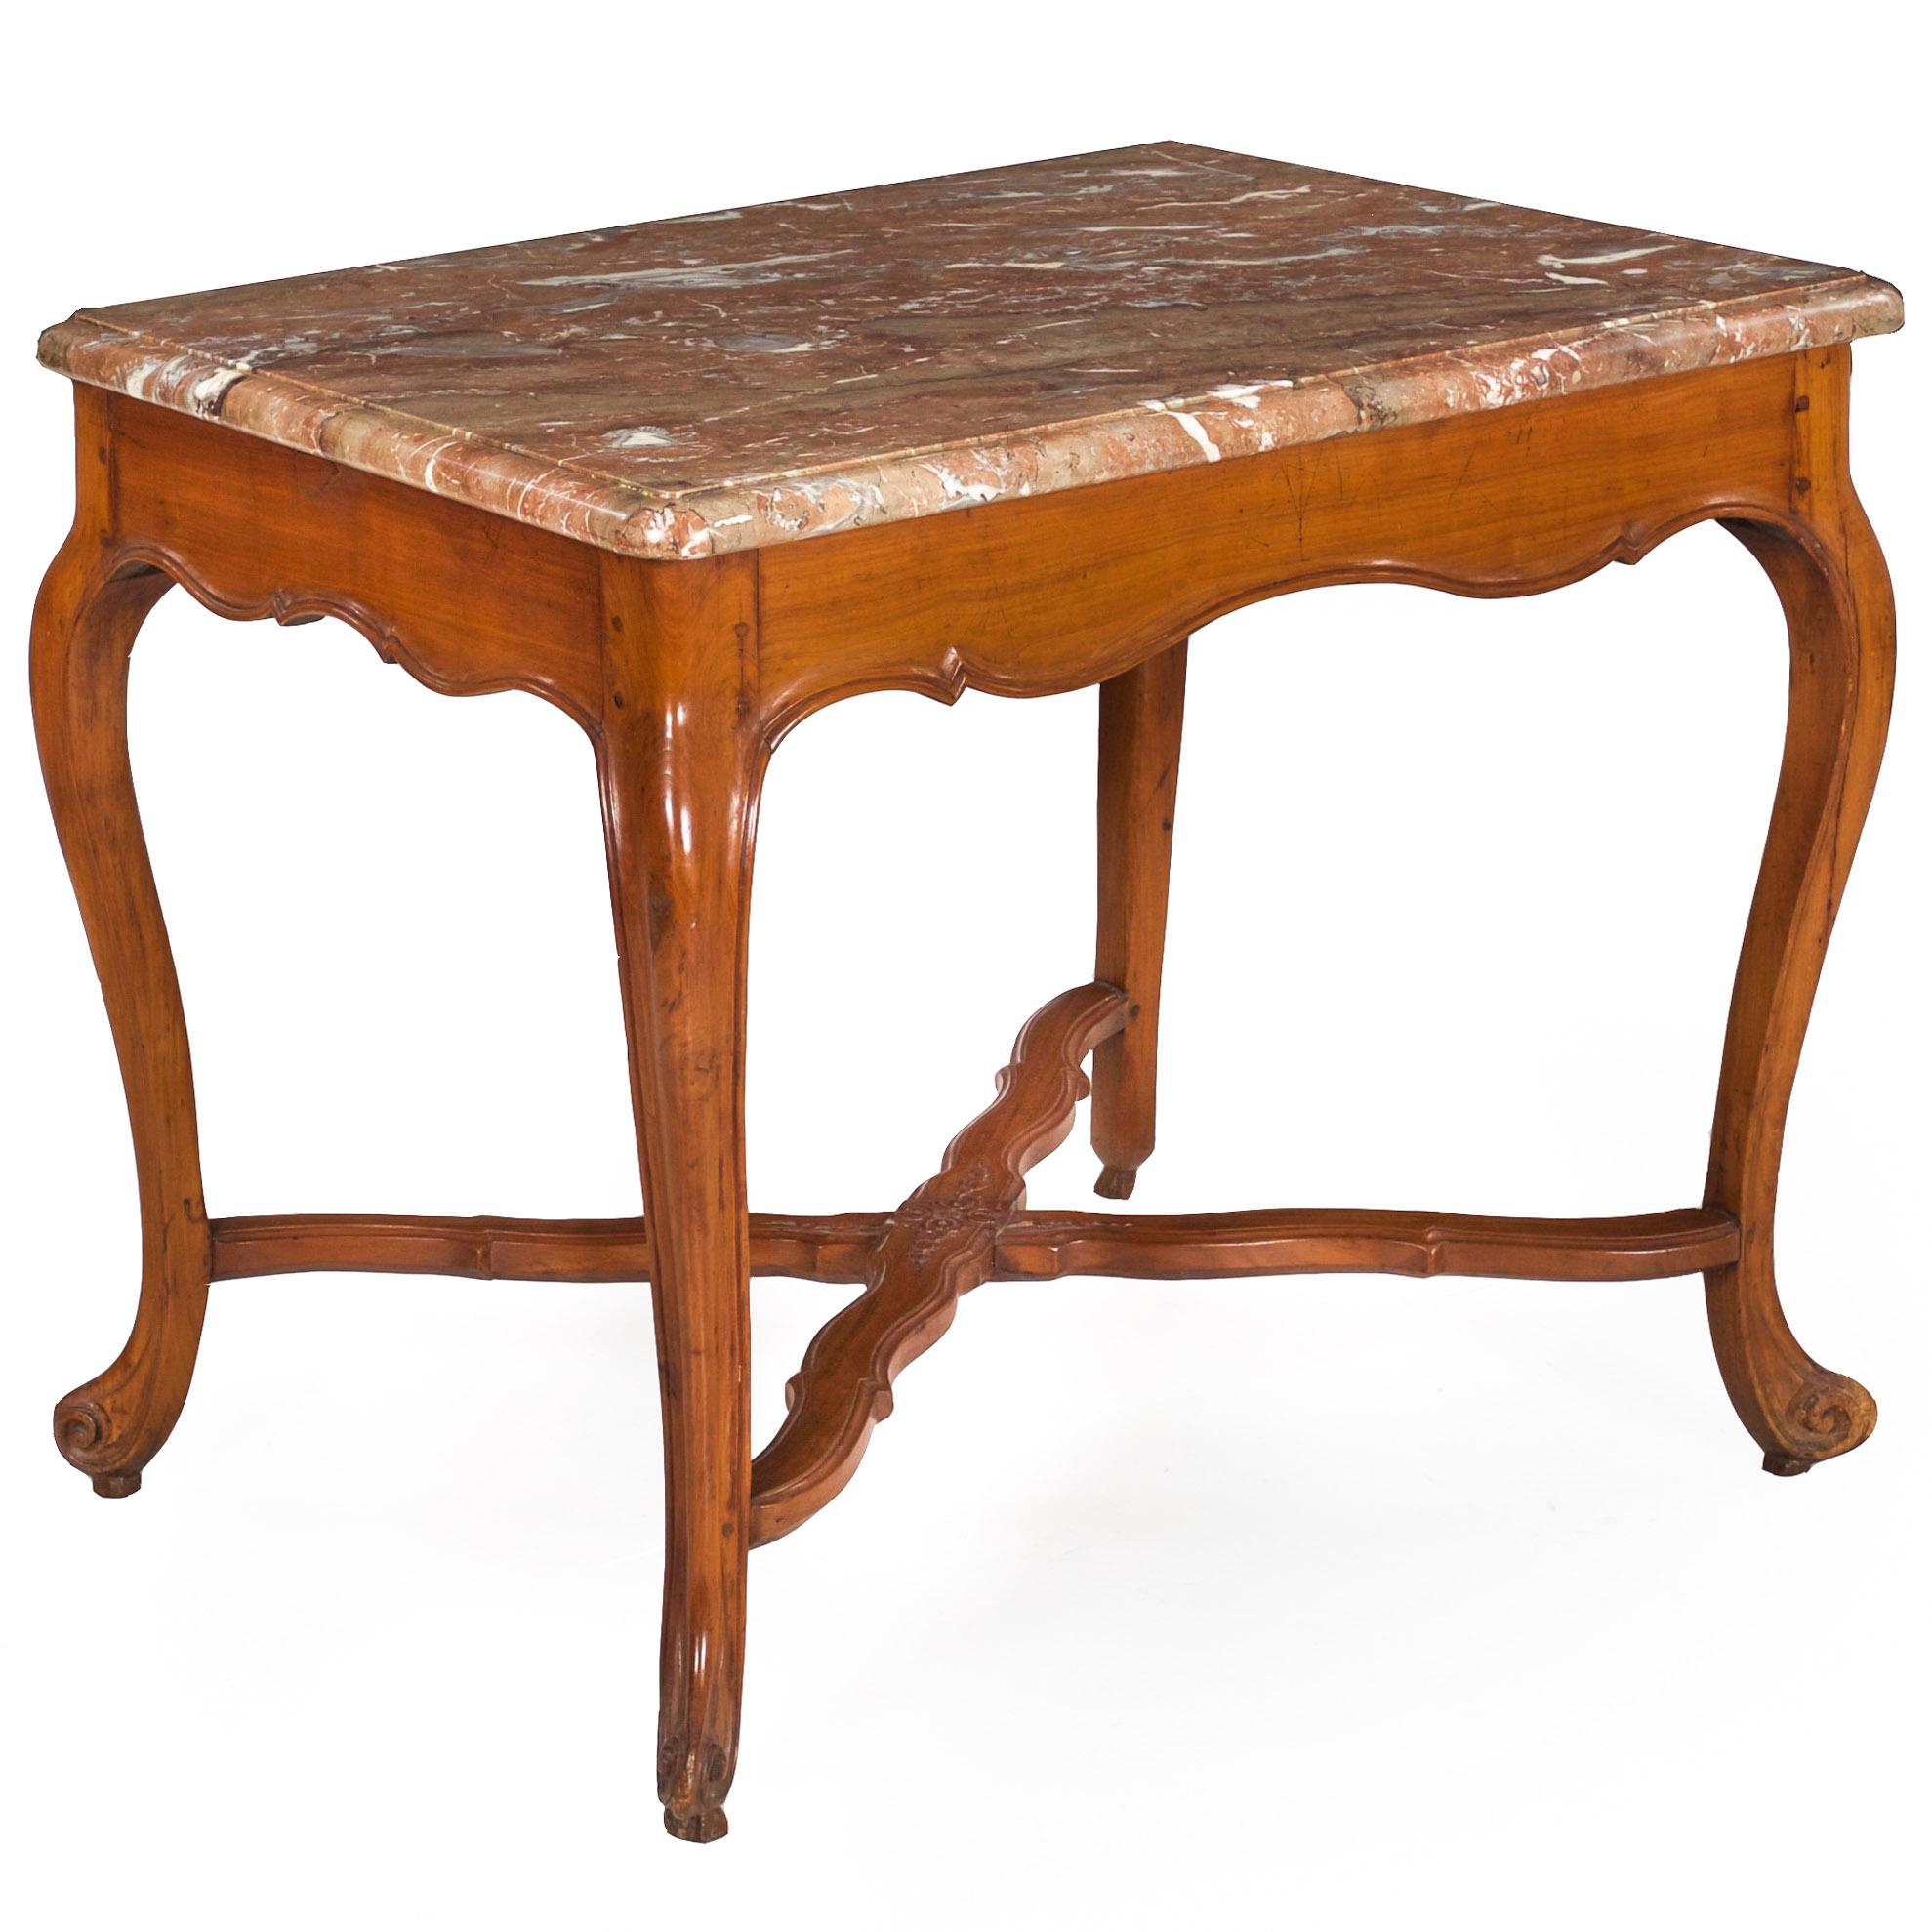 LOUIS XV PROVINCIAL CHERRYWOOD MARBLE-TOP CENTER TABLE
France, circa last quarter of the 18th century
Item # 111XPY03A 

A fine center table characterized by a veined rose-and-beige thumb-molded marble top projecting over an undulating 